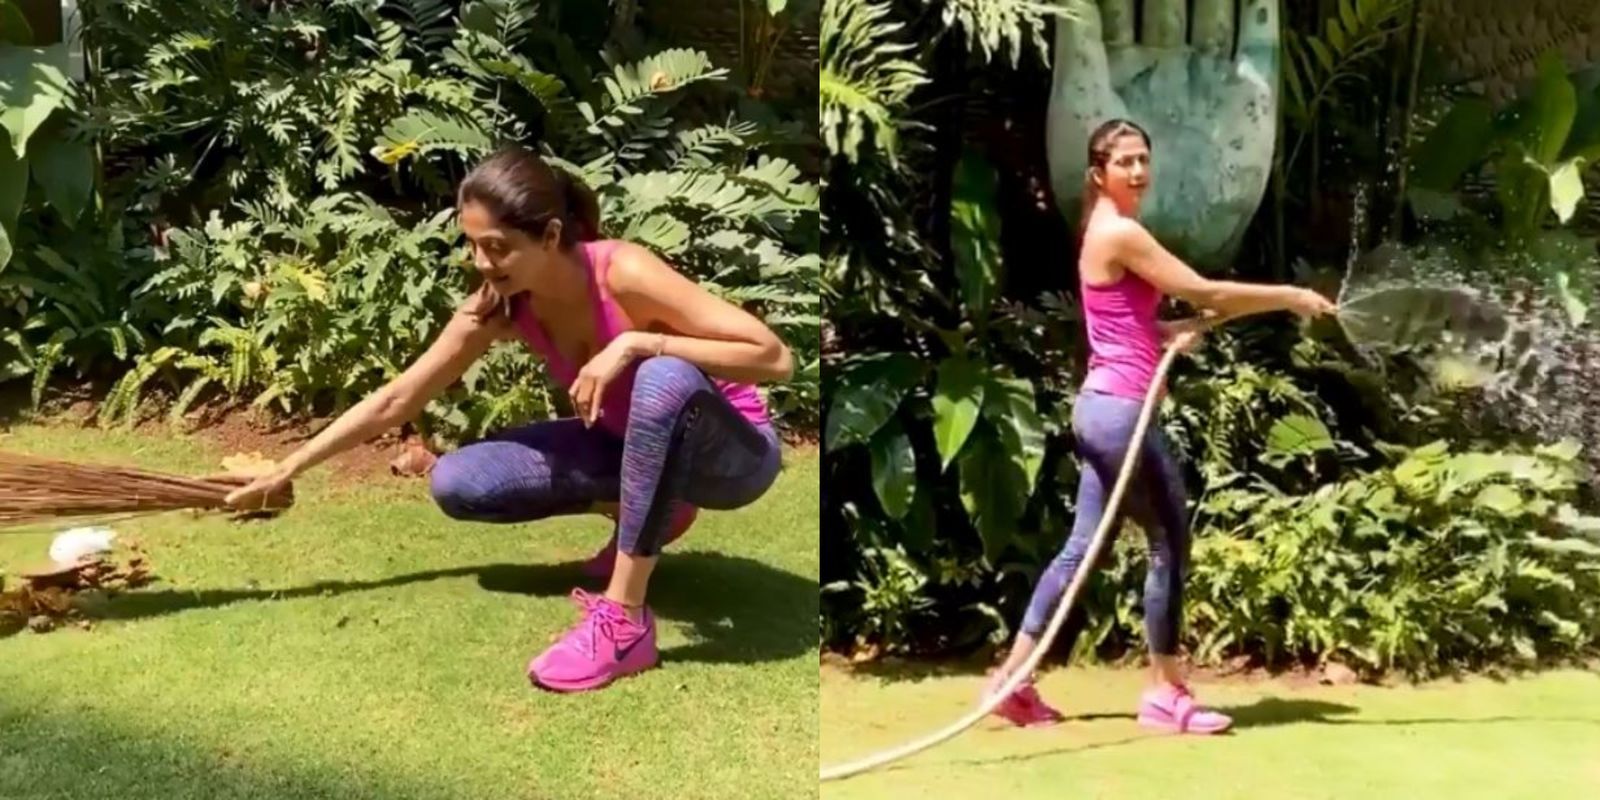 Shilpa Shetty Shares Video Of The ‘Best Workout’, And It’s Garden And ‘Ghar Ki Safaai’